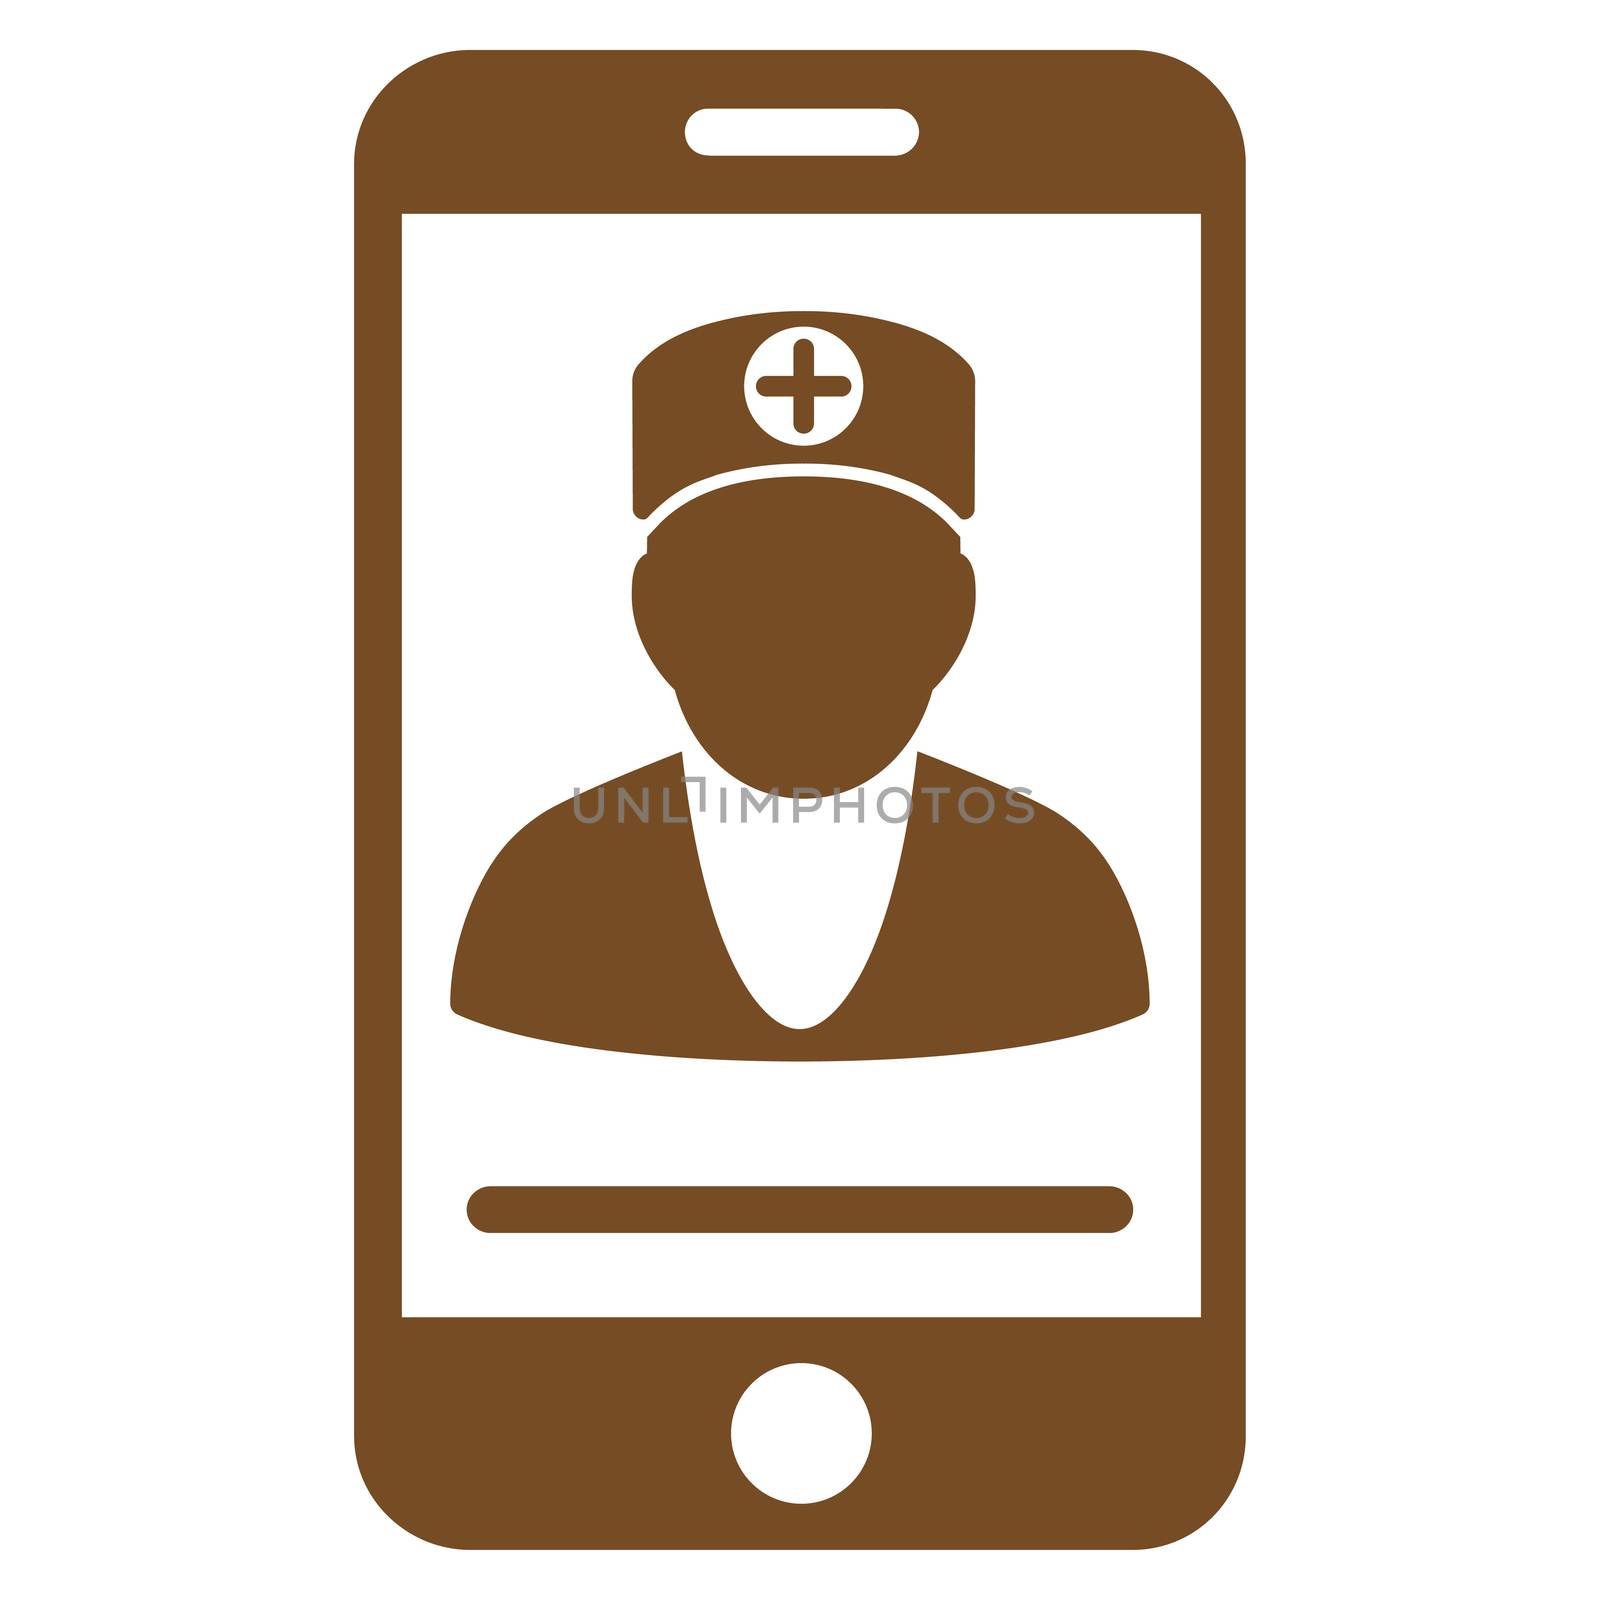 Online Doctor raster icon. Style is flat symbol, brown color, rounded angles, white background.